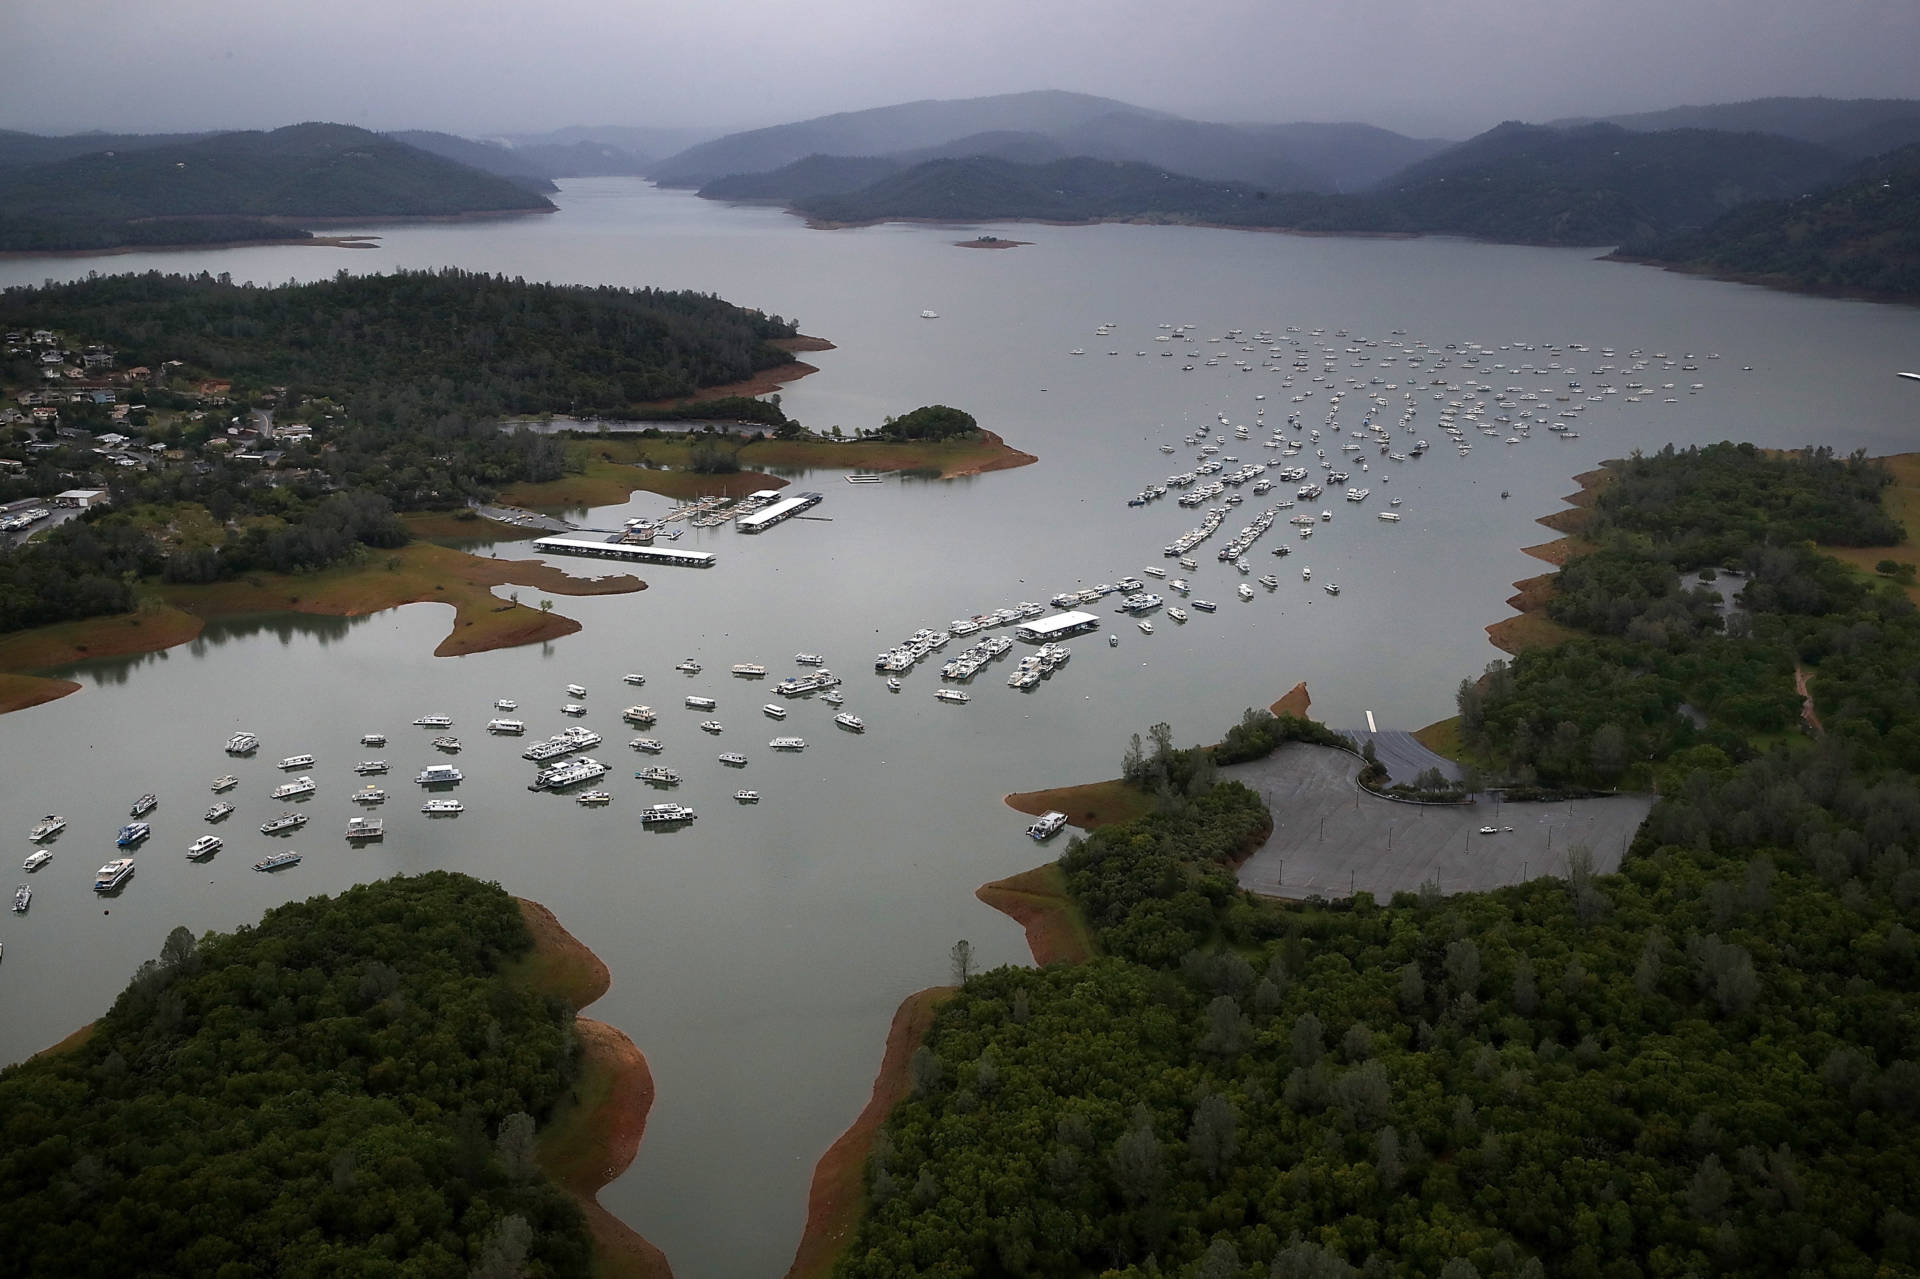 Bidwell Marina at Lake Oroville in April. After record rainfall and snow in the mountains, much of California's landscape has turned from brown to green and reservoirs across the state are near capacity. Justin Sullivan/Getty Images